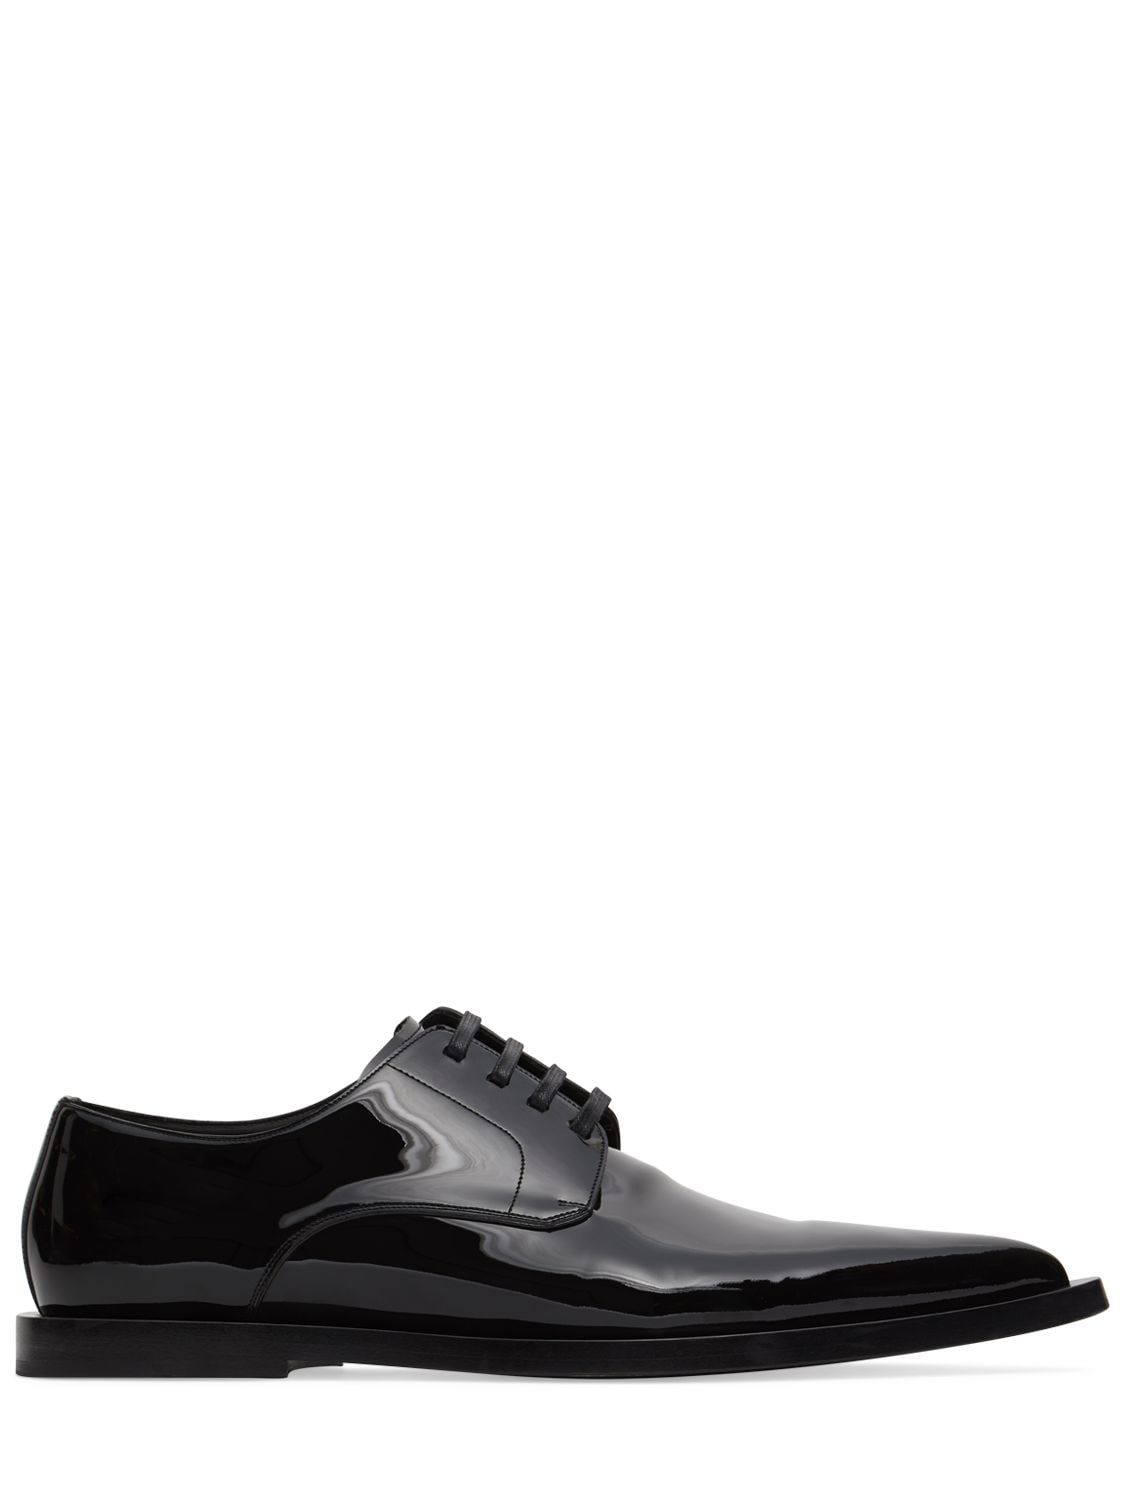 Dolce & Gabbana Achille Patent Leather Derby Shoes In Black